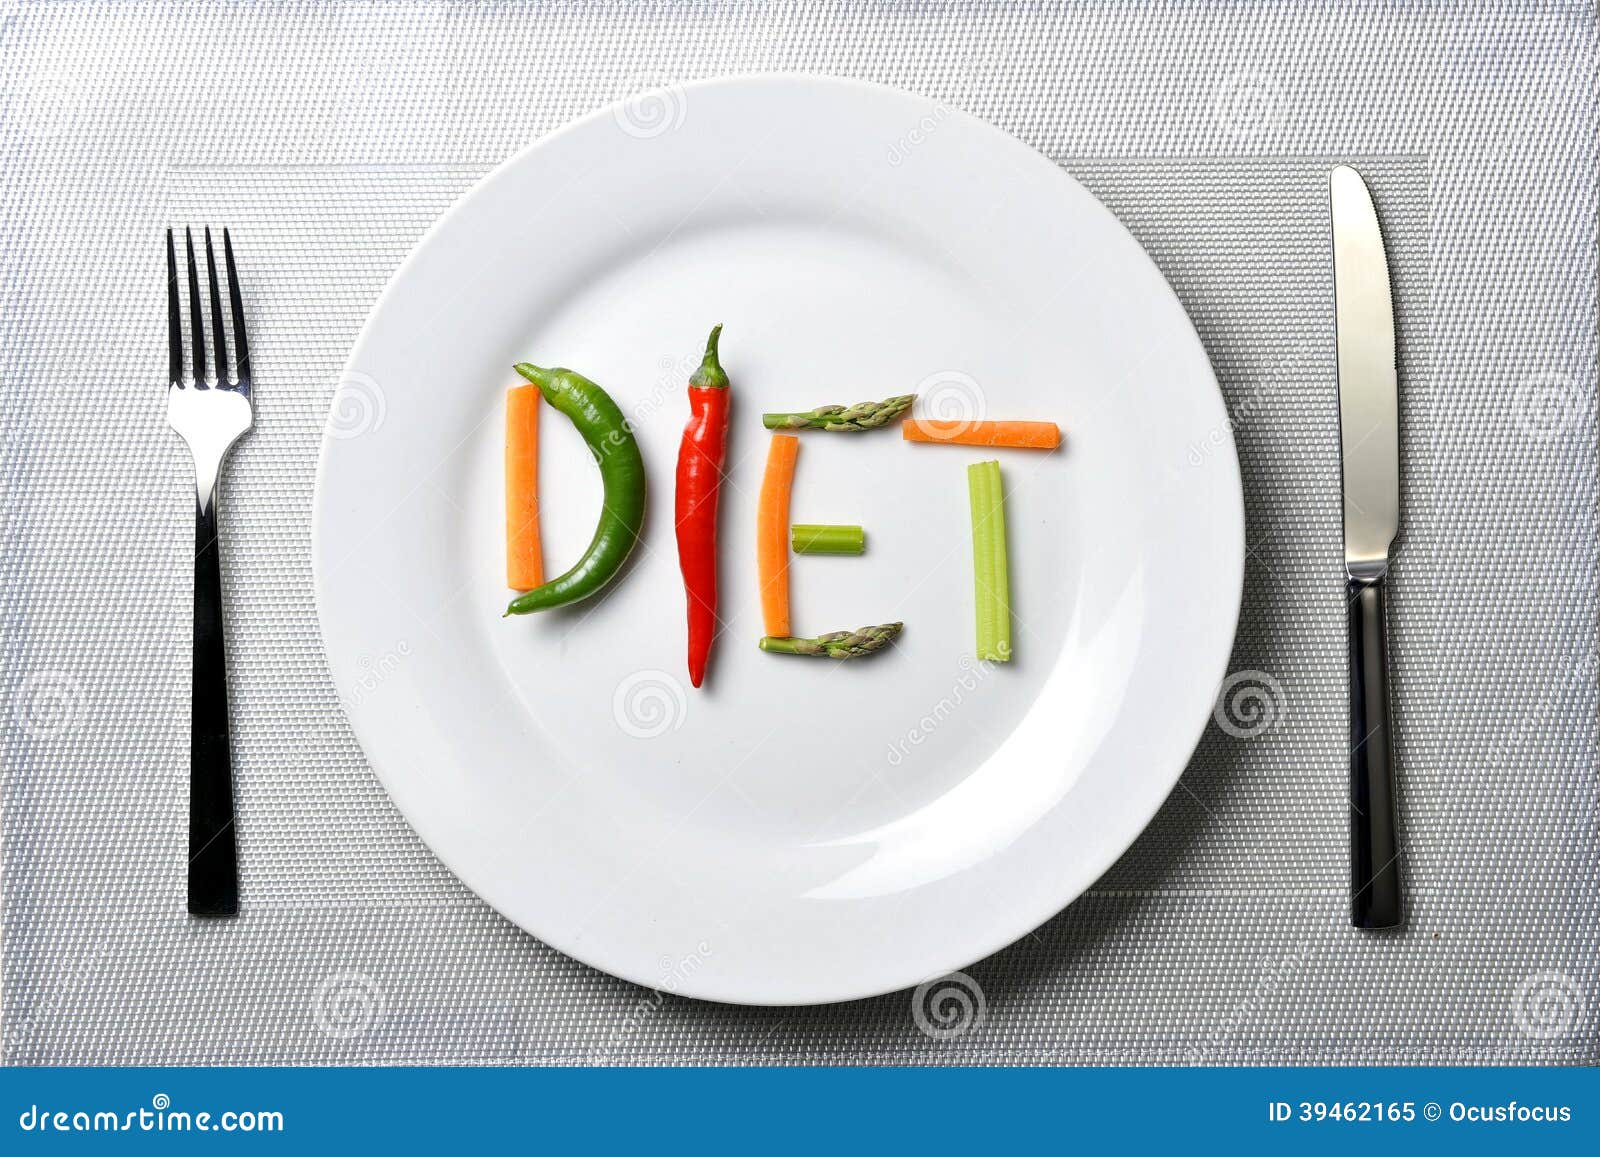 diet written with vegetables in healthy nutrition concept